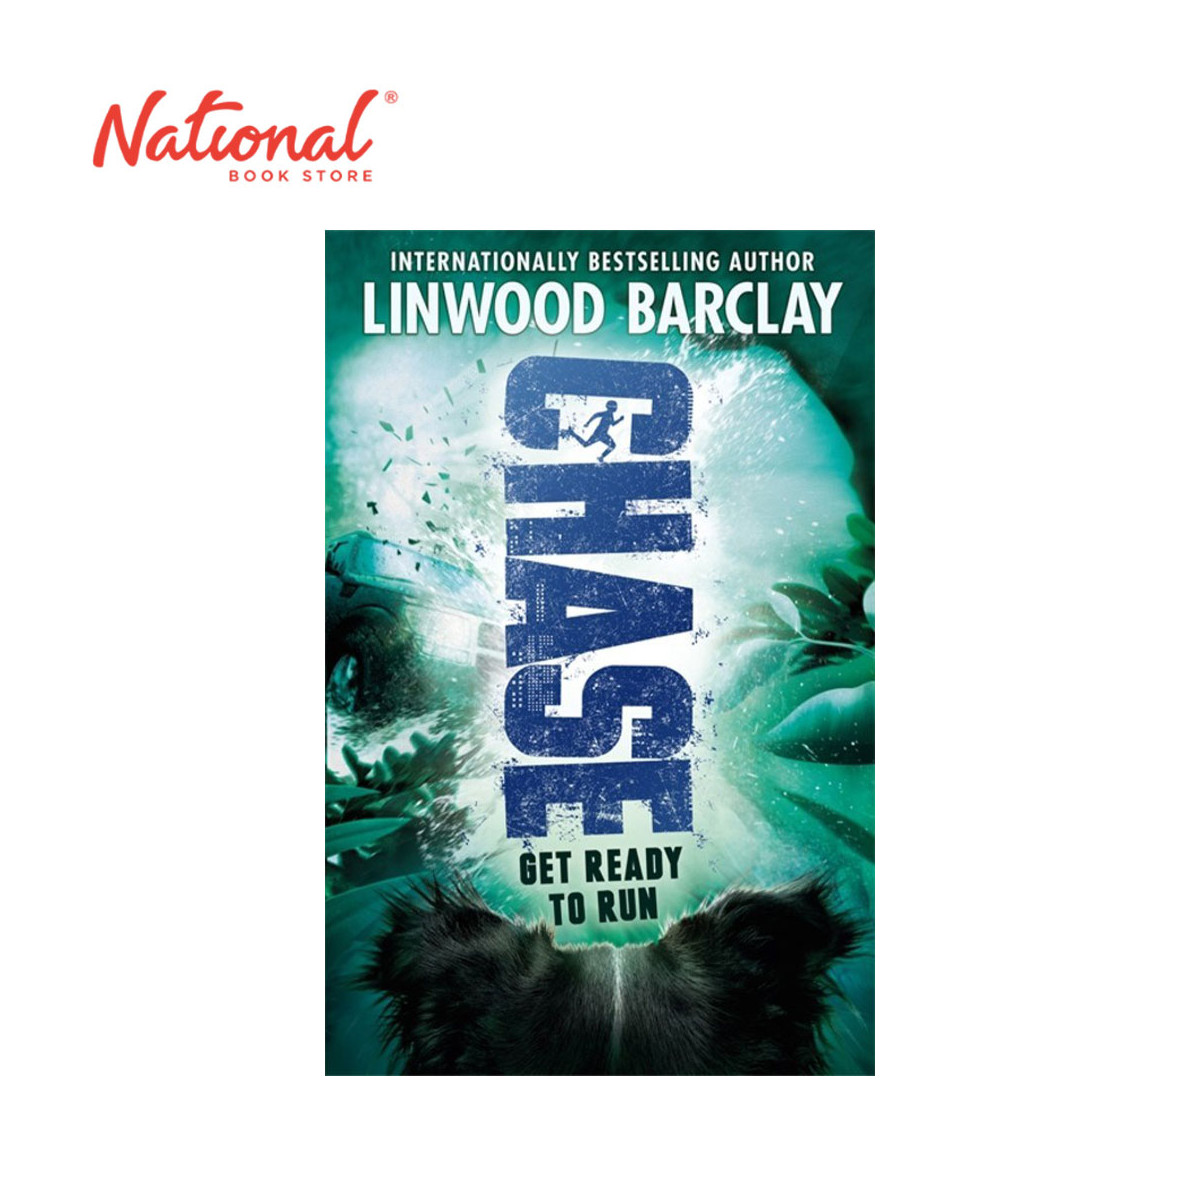 Chase by Linwood Barclay - Trade Paperback - Thriller, Mystery & Suspense